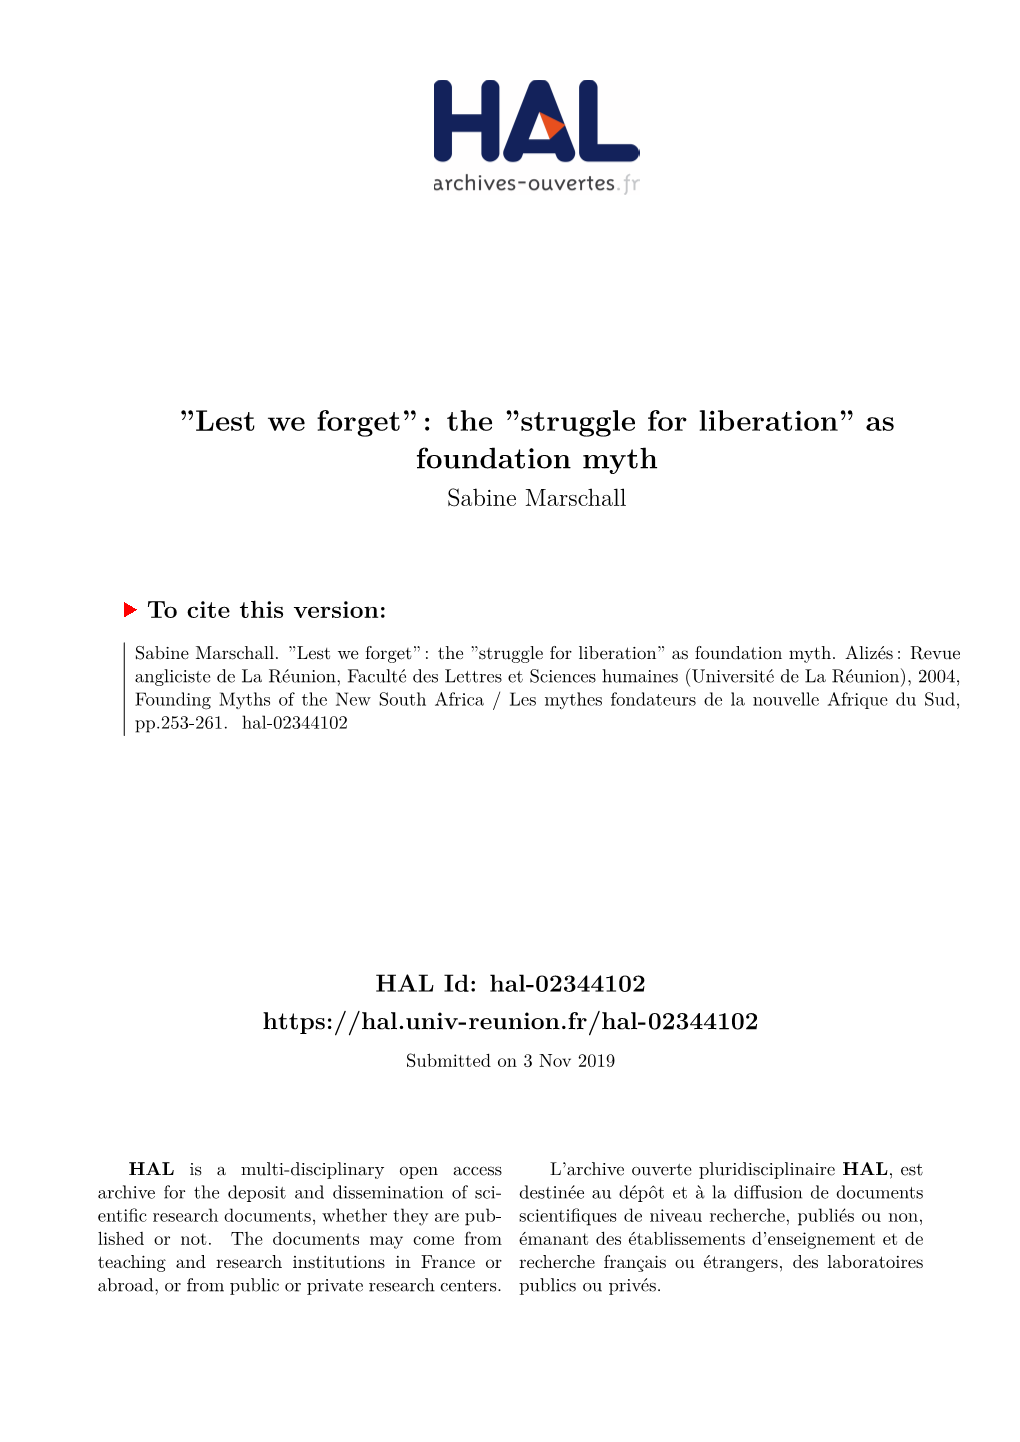 ''Lest We Forget'': the ''Struggle for Liberation'' As Foundation Myth